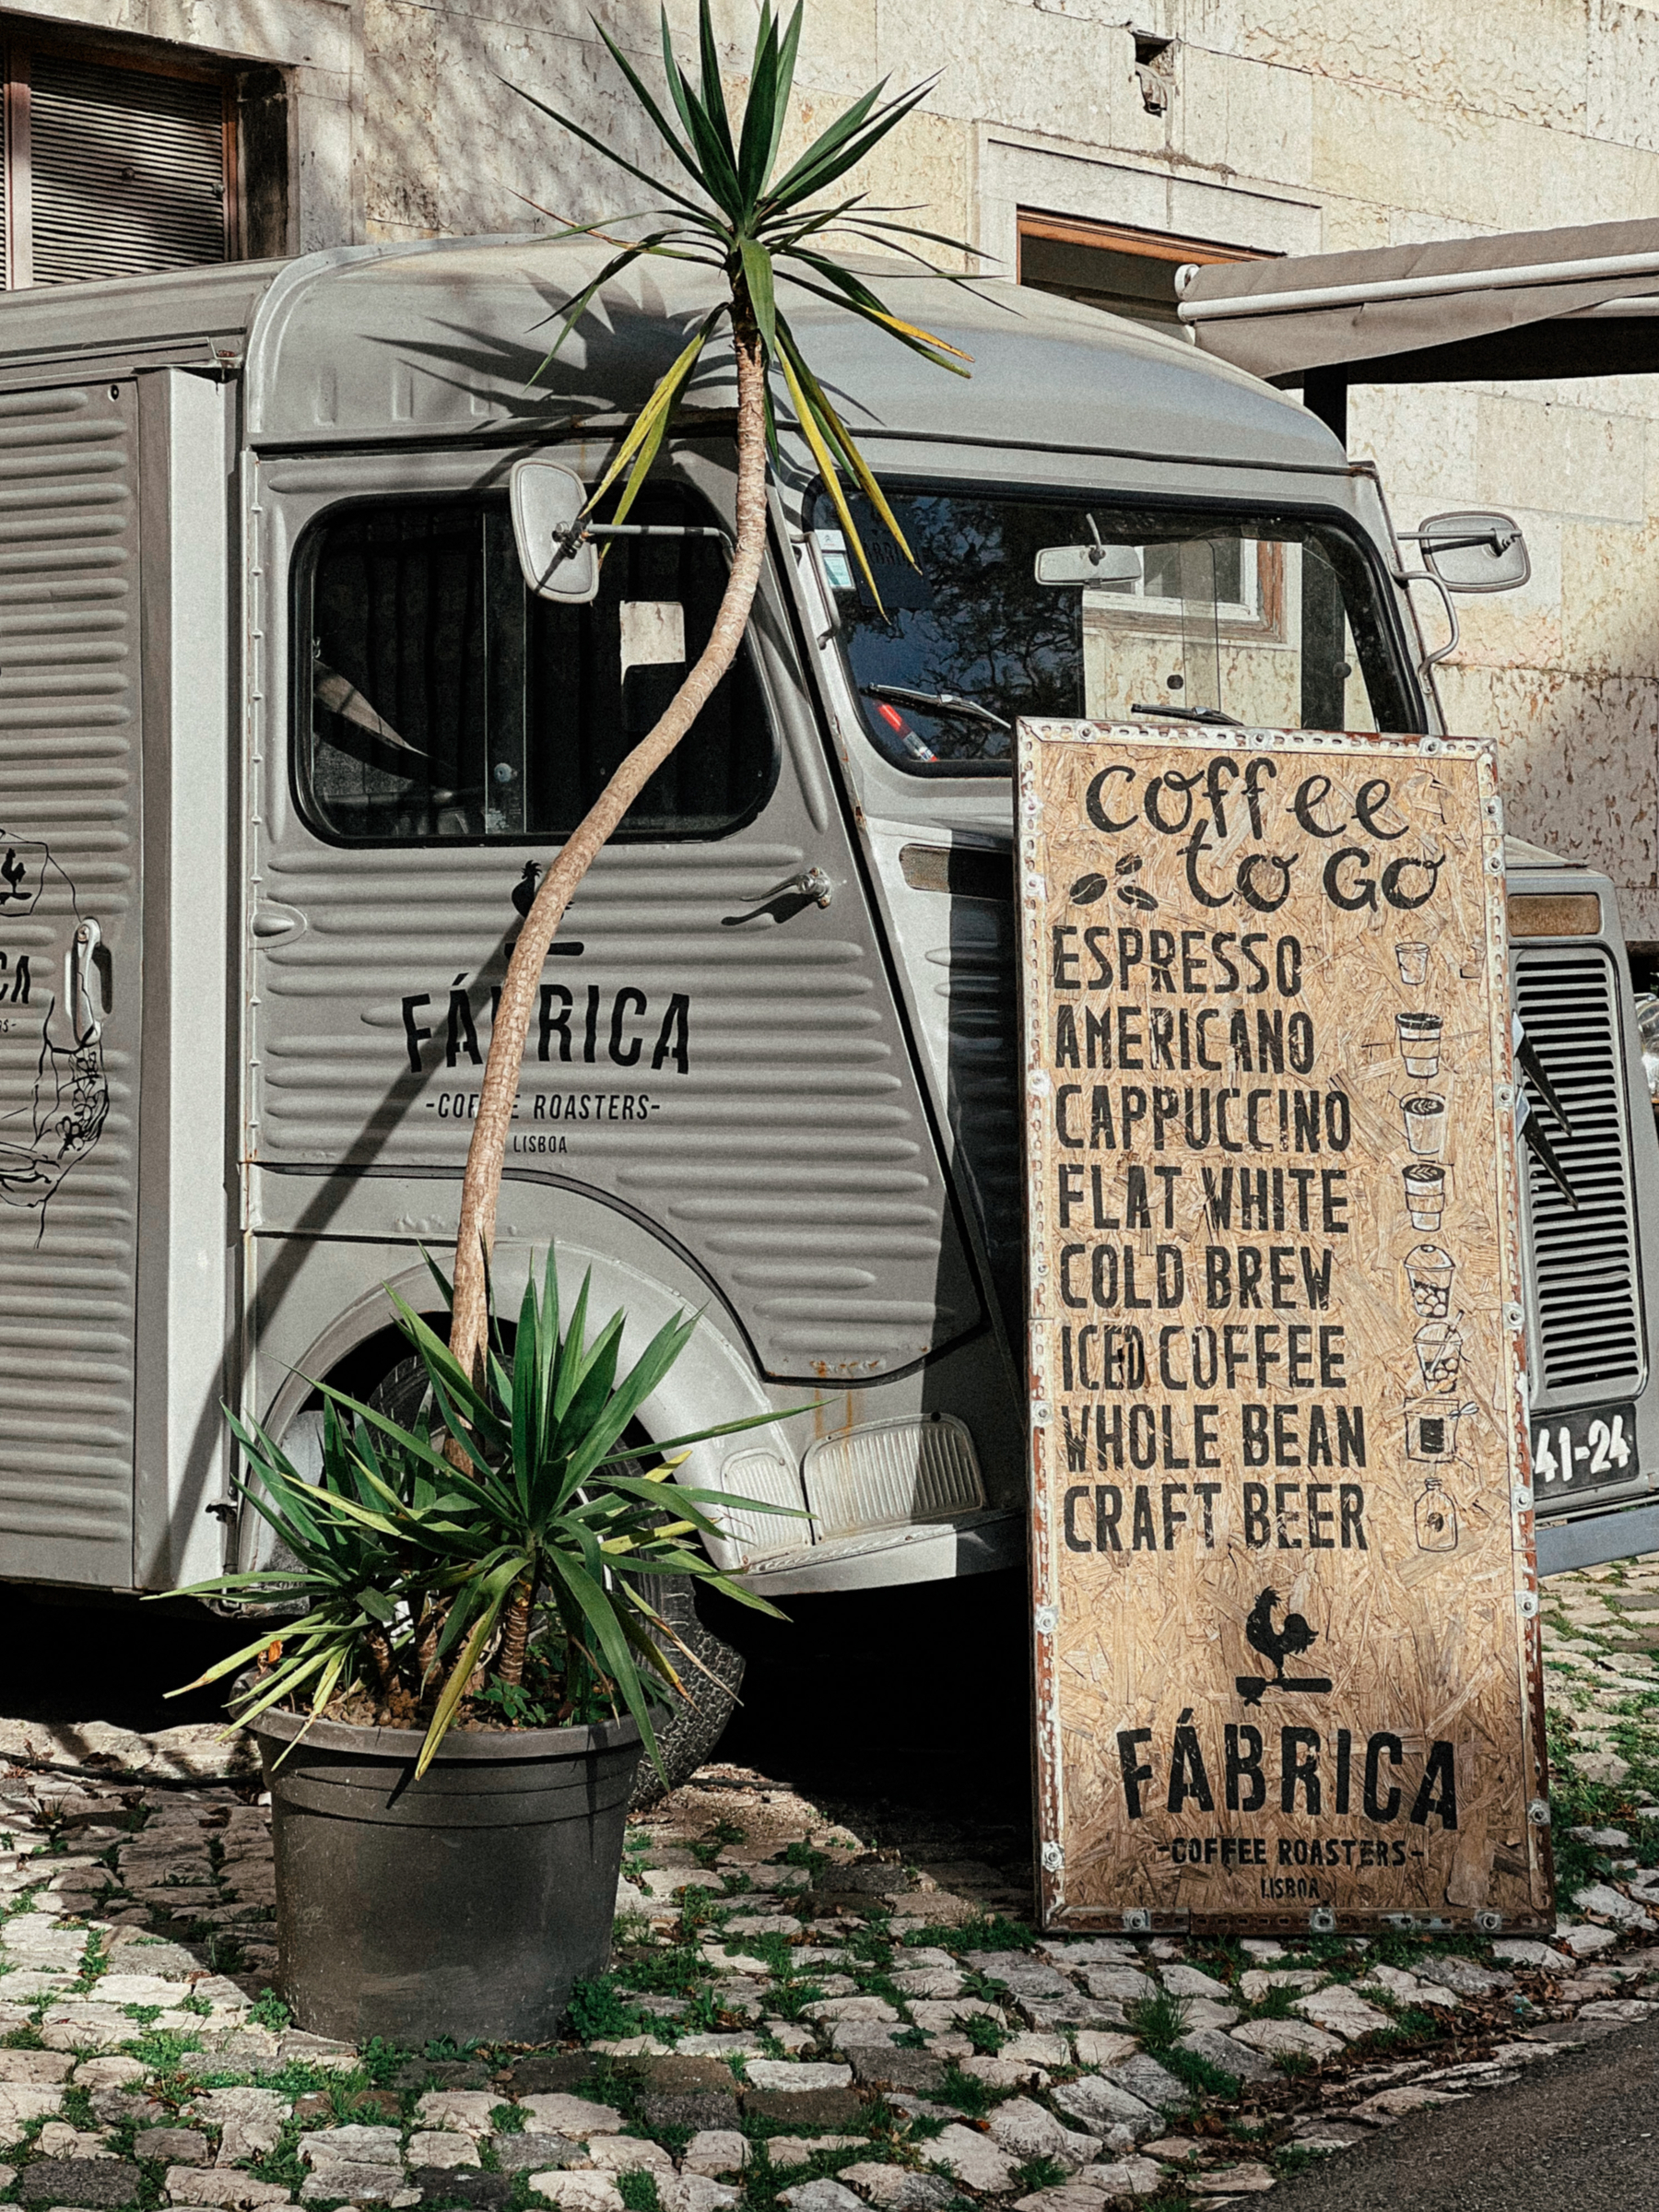 A coffee truck, with a small potted palm by the side. 